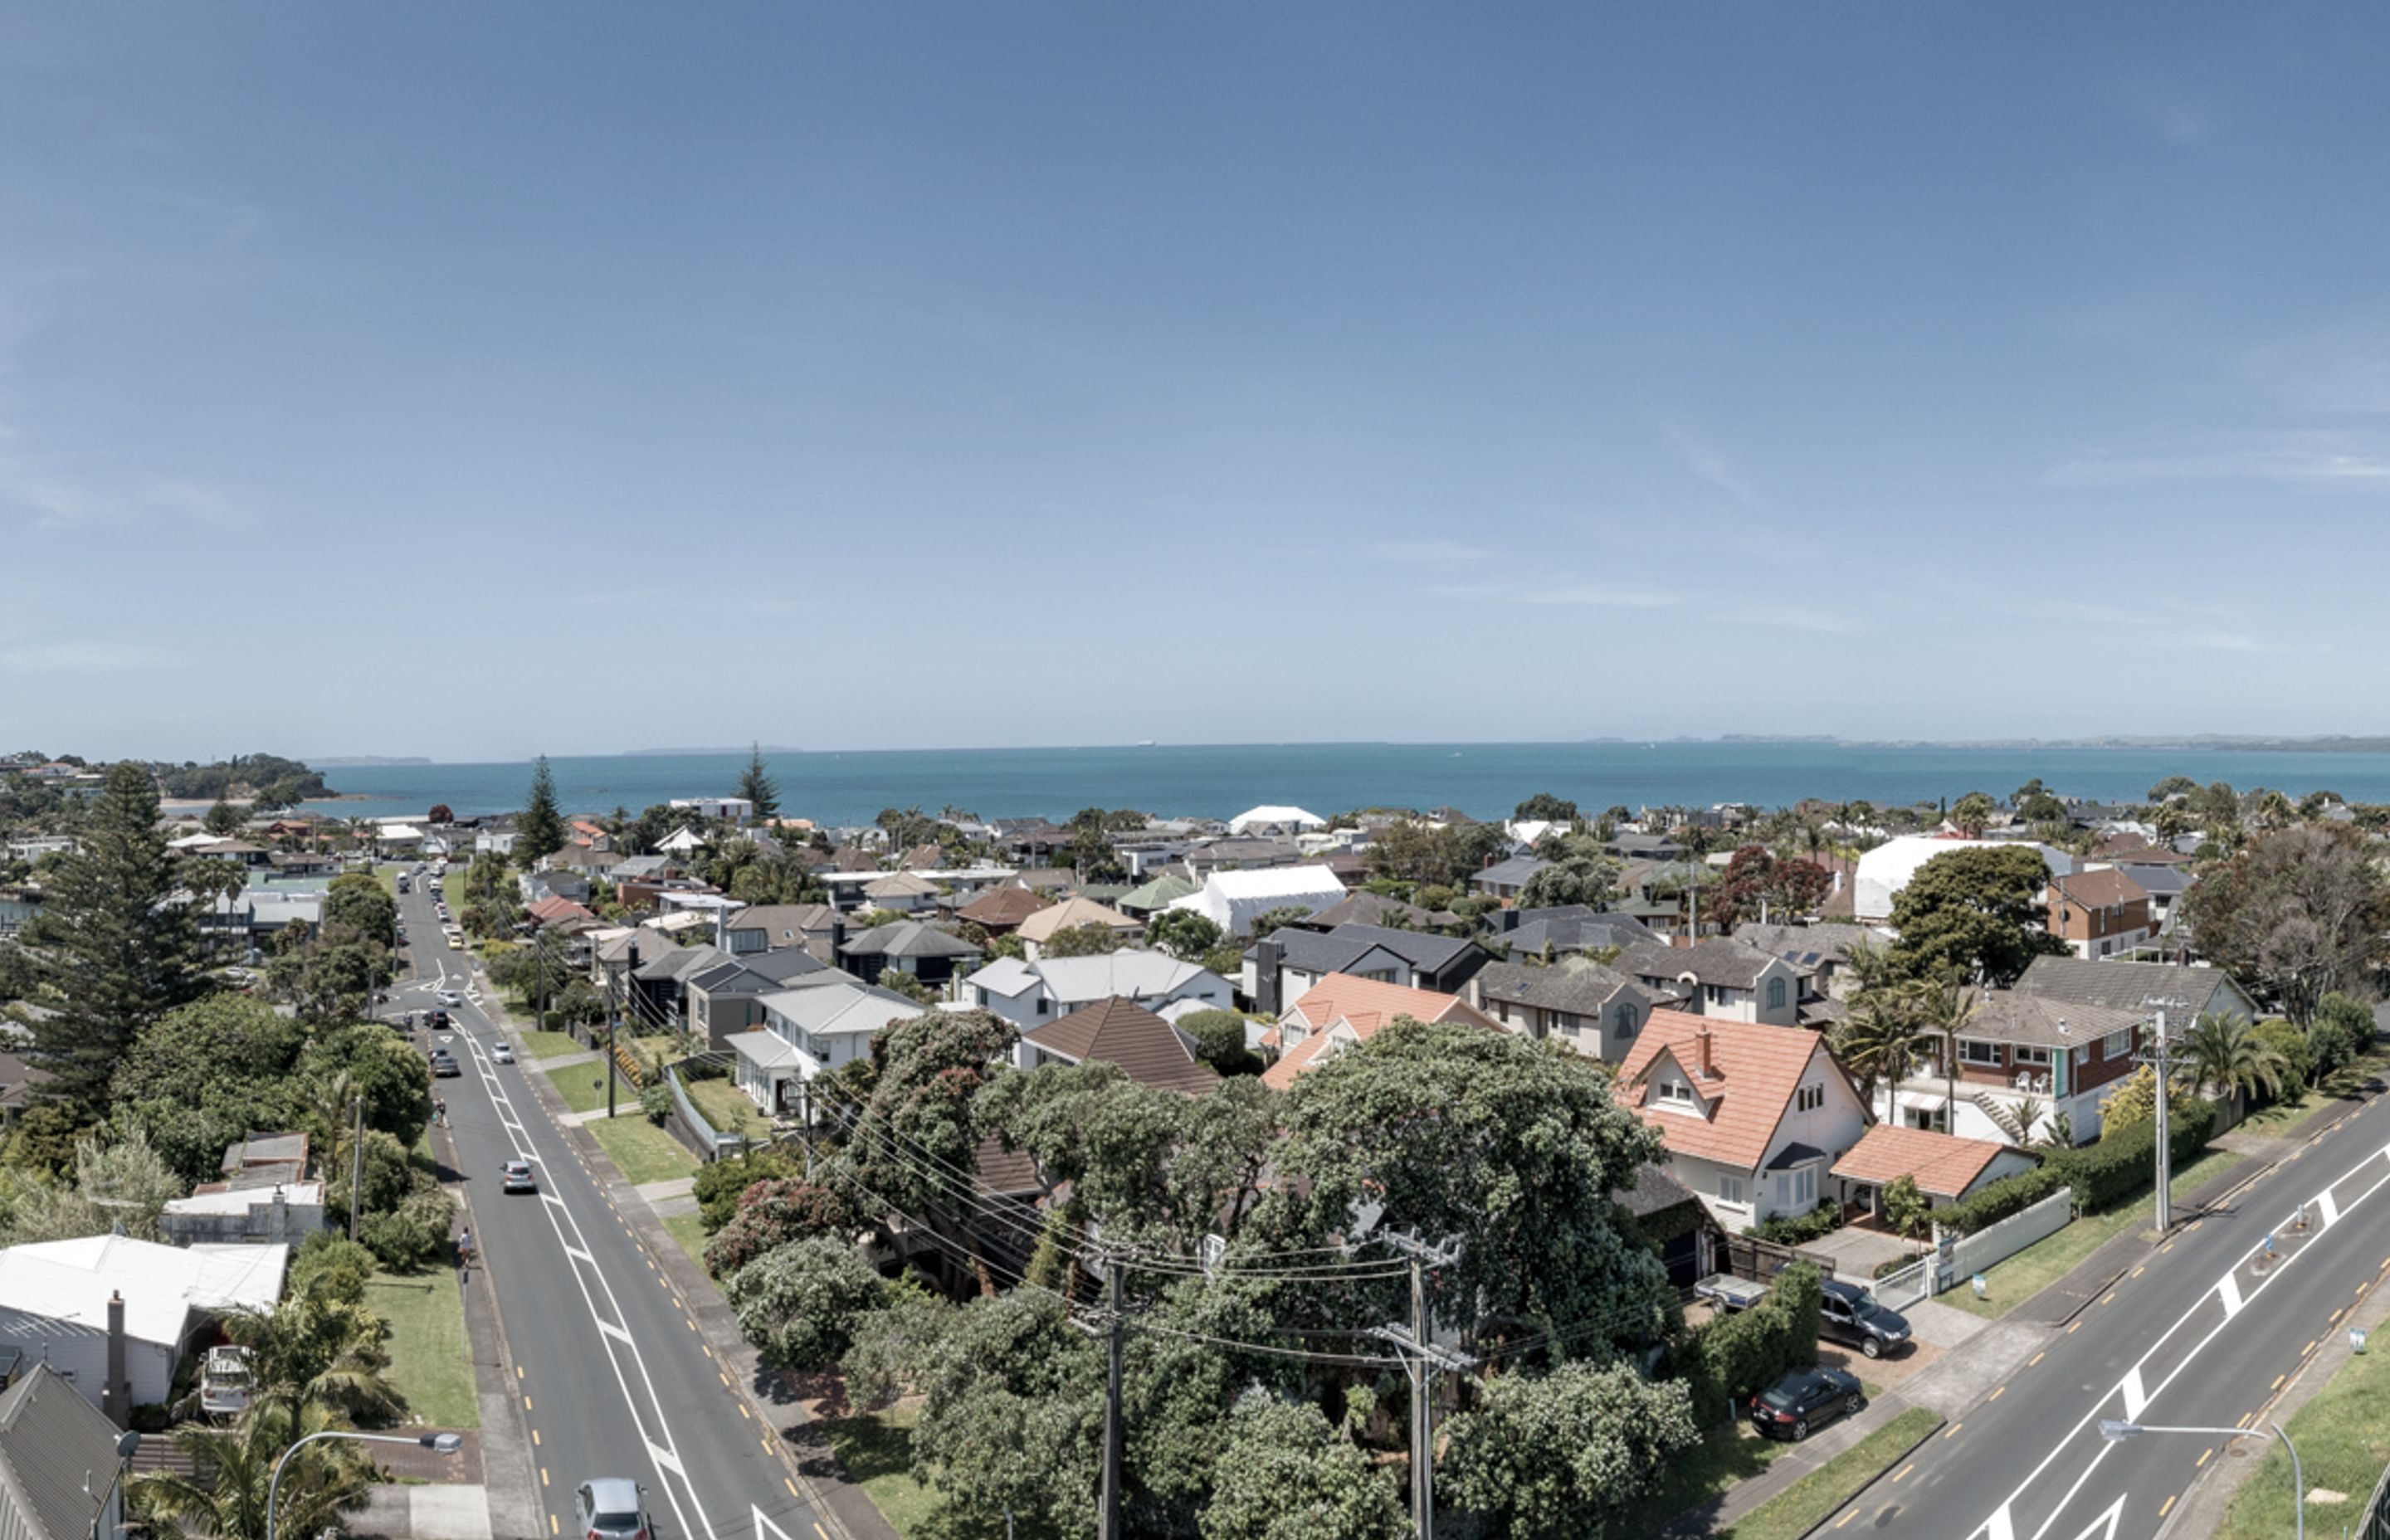 Construction Photography NZ - CPNZ - NZRPG - Drone View Checking Photo 1